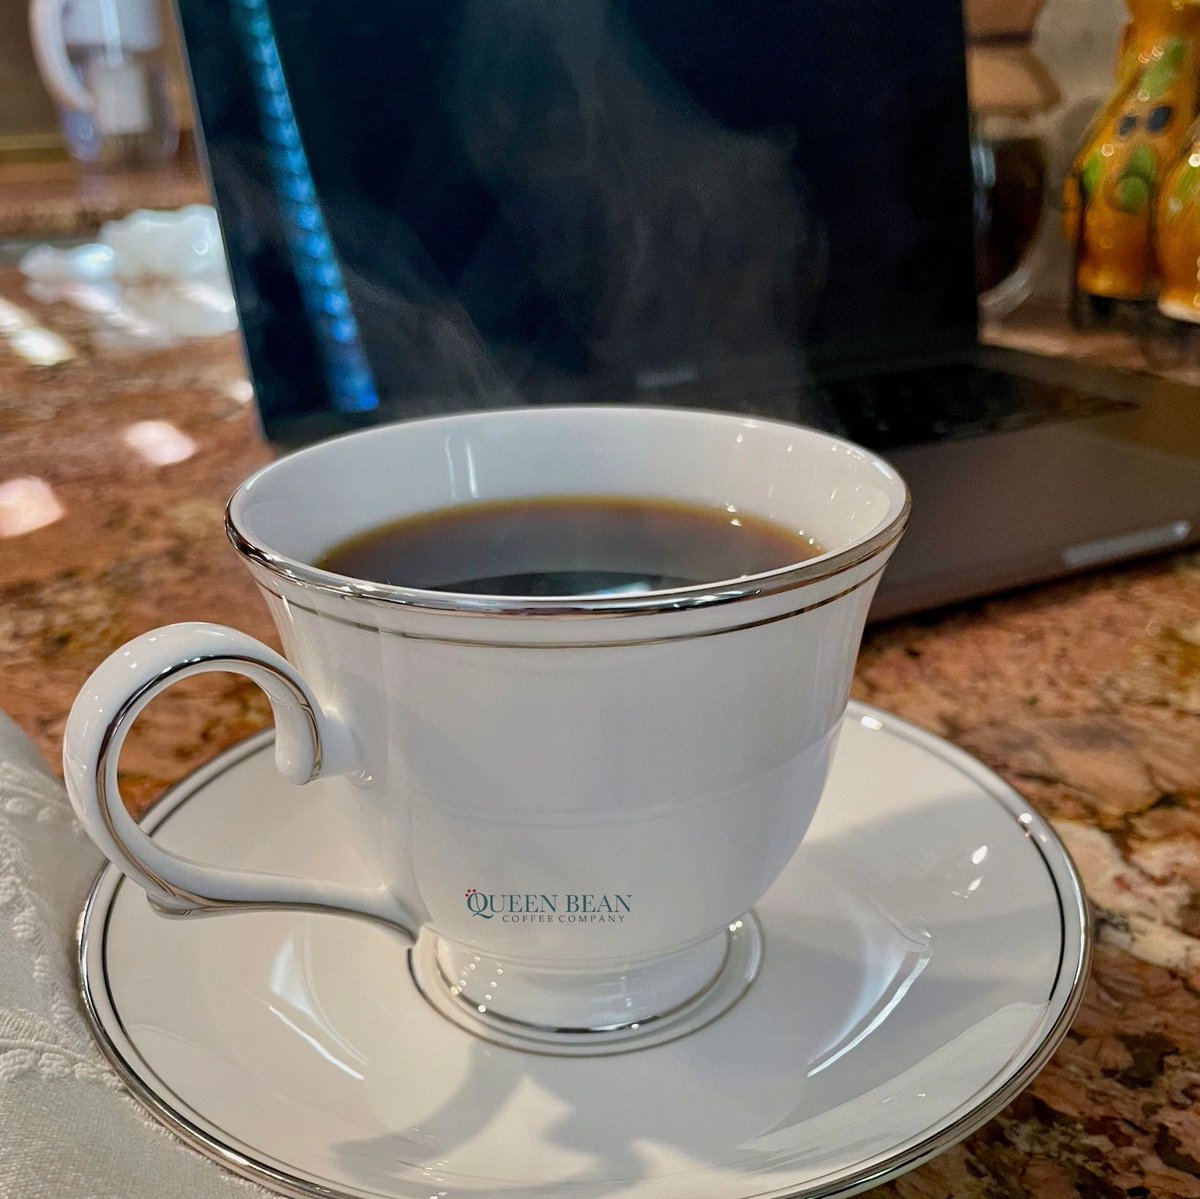 Good morning, good morning! Time to #coffee up and get to work. Thank you bright, beautiful Organically-grown #Breakfast Blend! 15% off your first order with code FT15: buff.ly/33KlW8s #TheQueenBean #Thursday #CoffeeLover